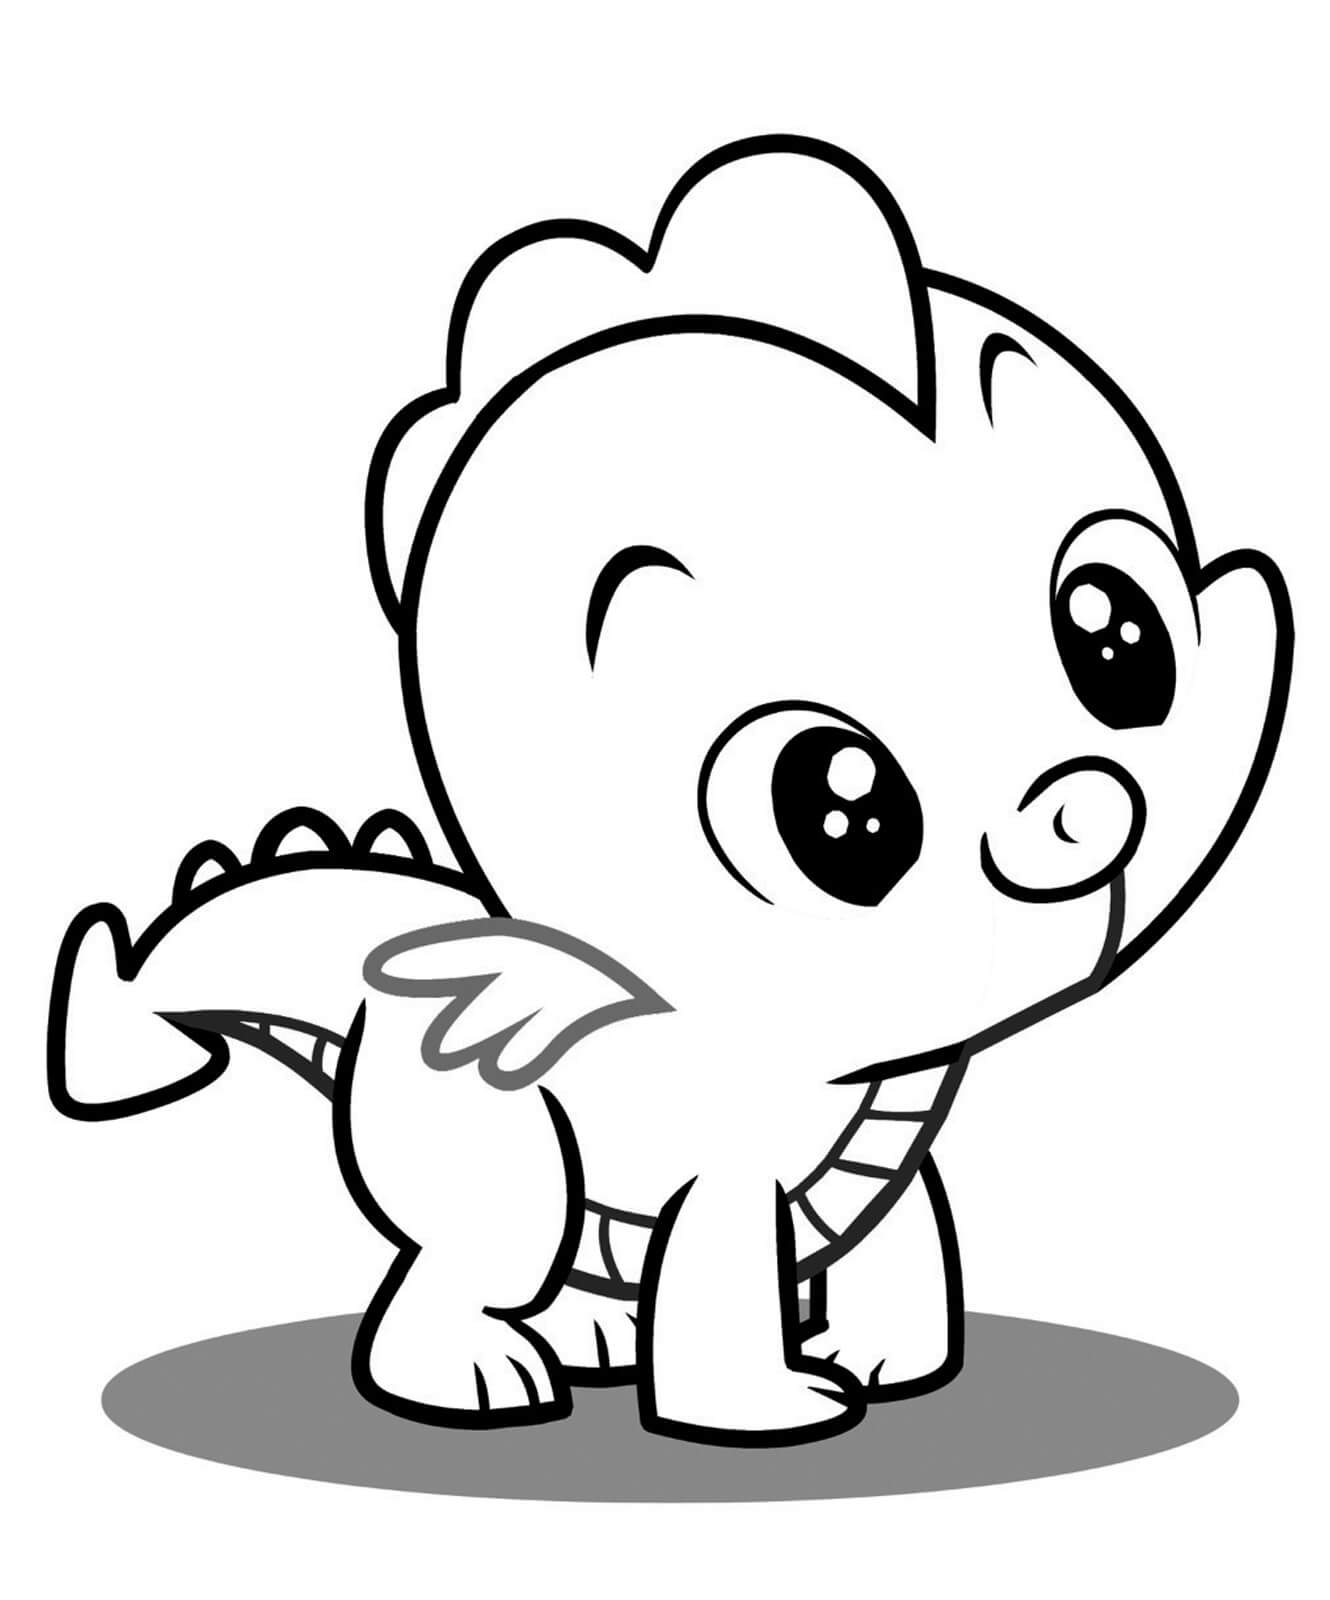 Spike coloring page